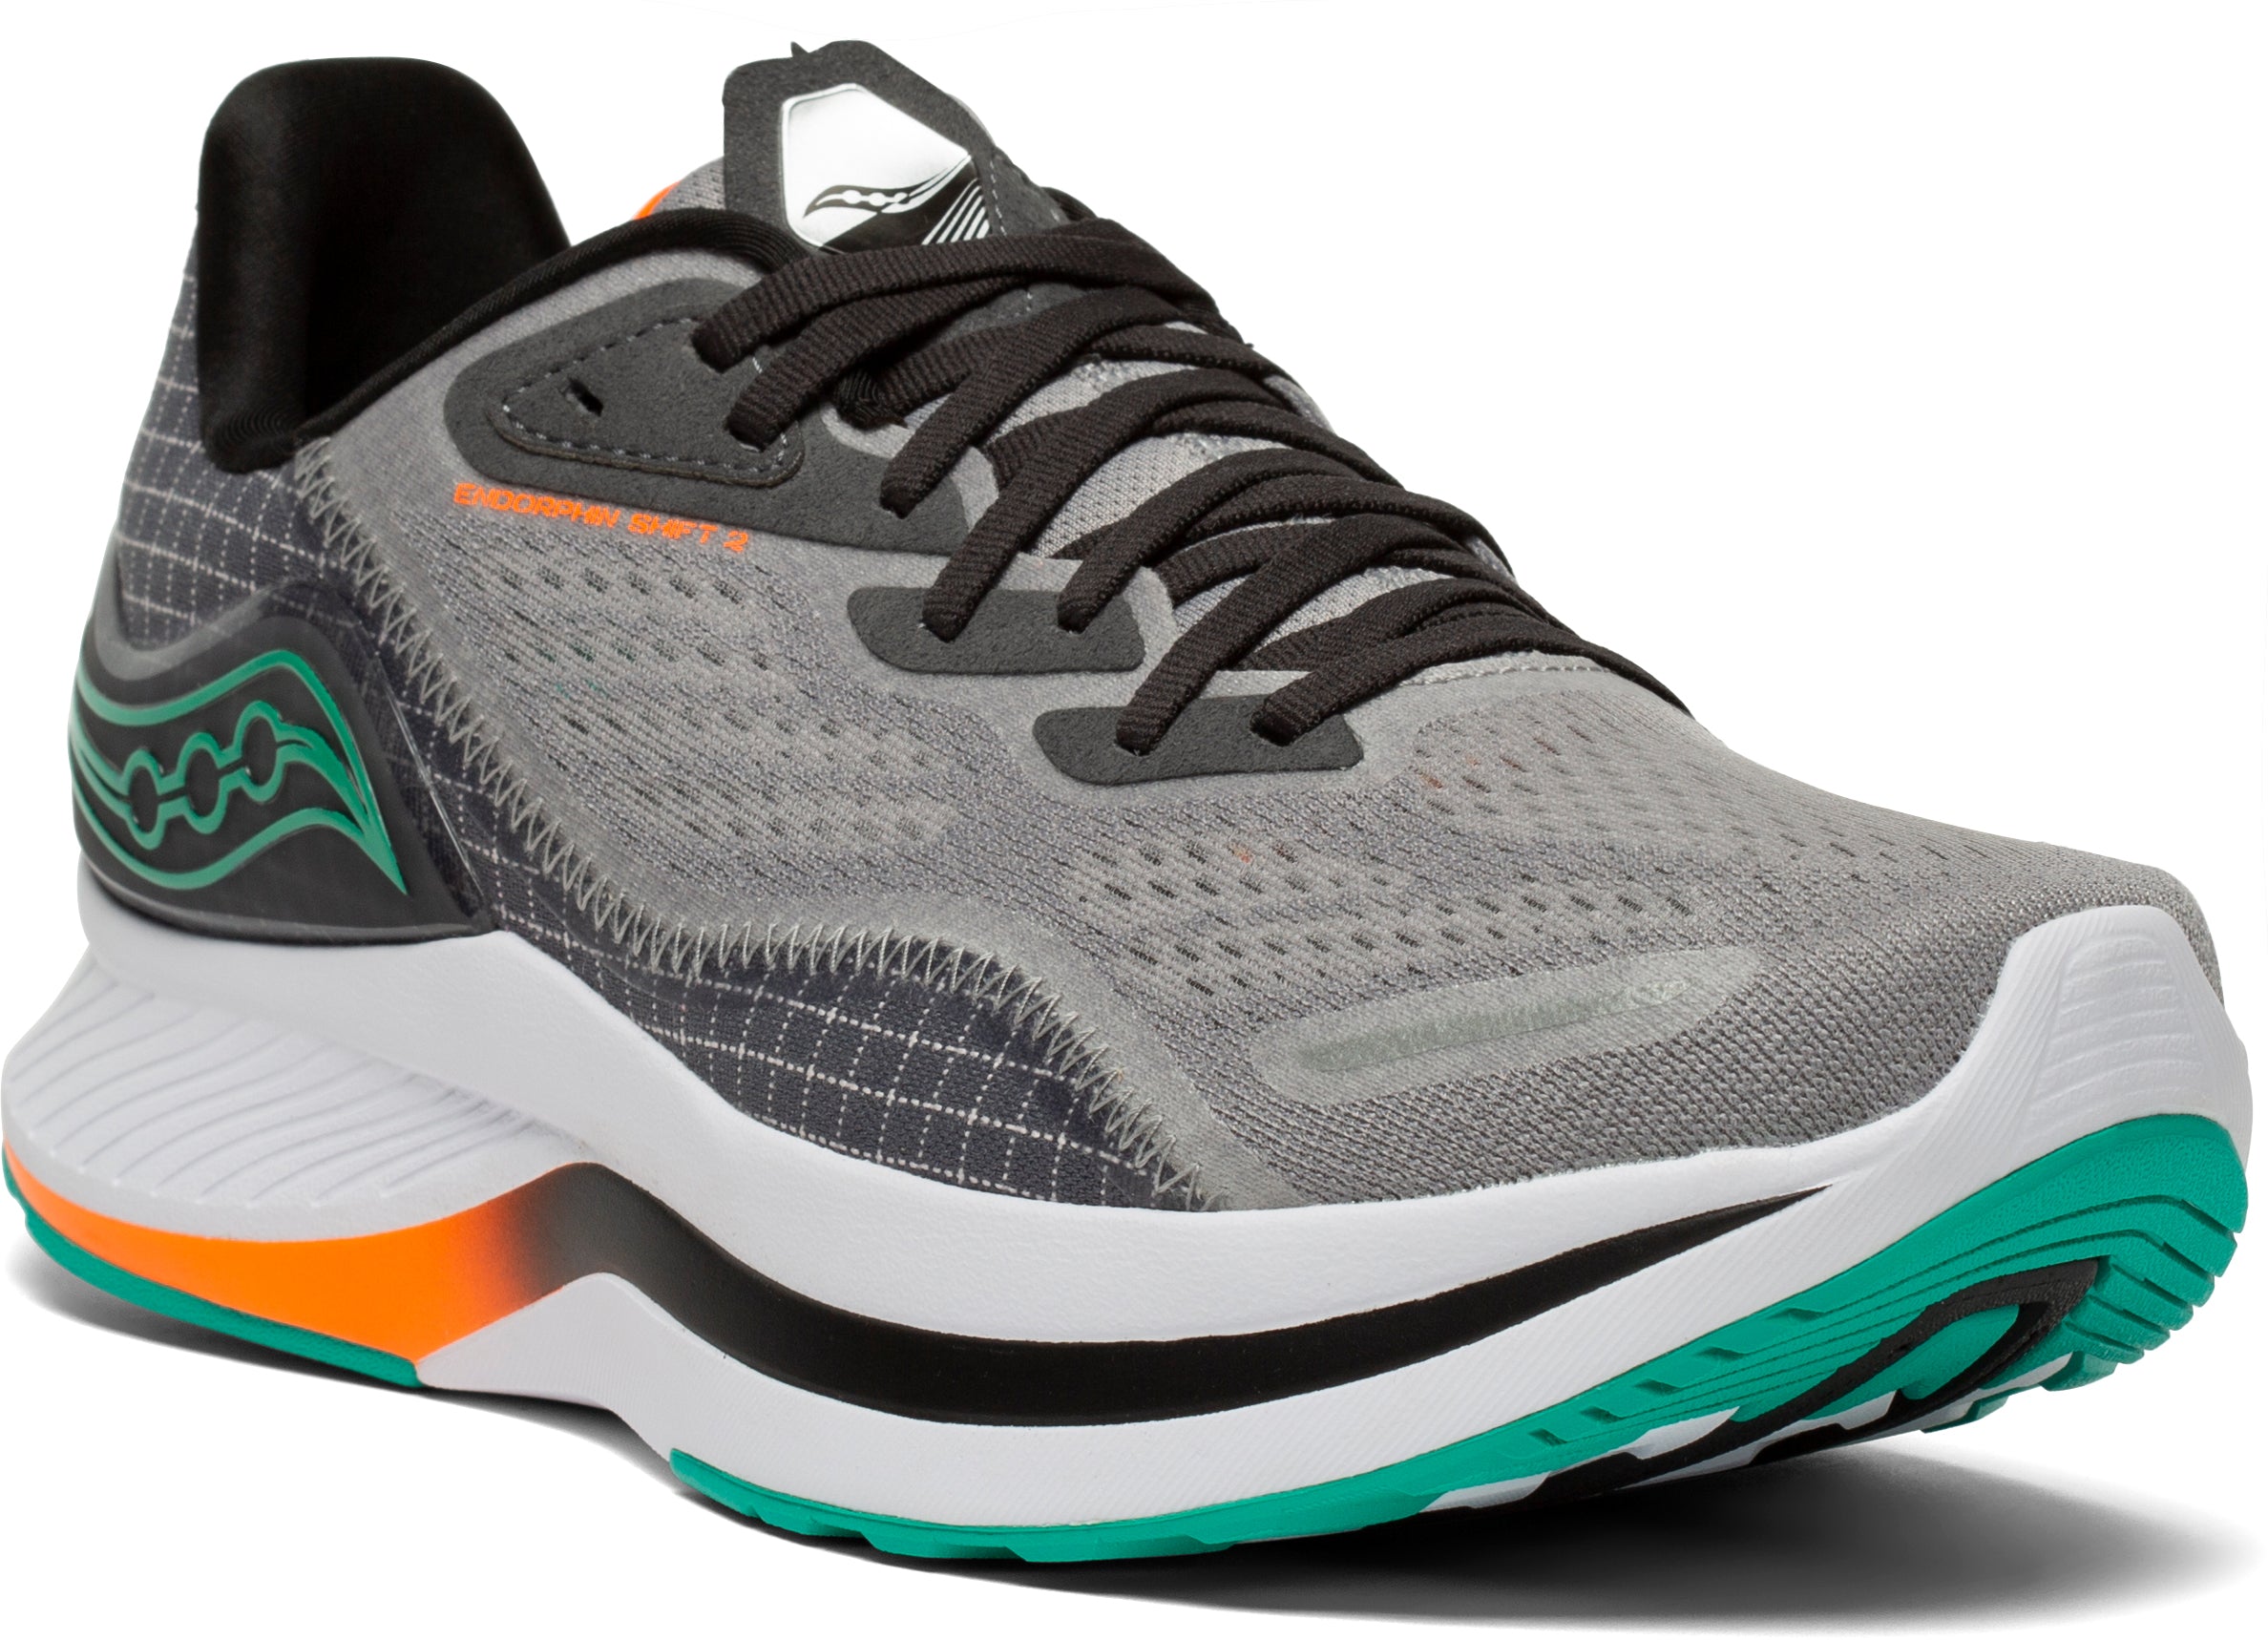 Saucony is certainly on to something with the Men's Endorphin Shift 2.  It is the definition of effortless performance. It mixes a lofty bed of super soft cushioning with propulsive Speedroll Technology that quickly moves the body into the next step, especially reducing the time the foot is on the ground and reducing the gait cycle.